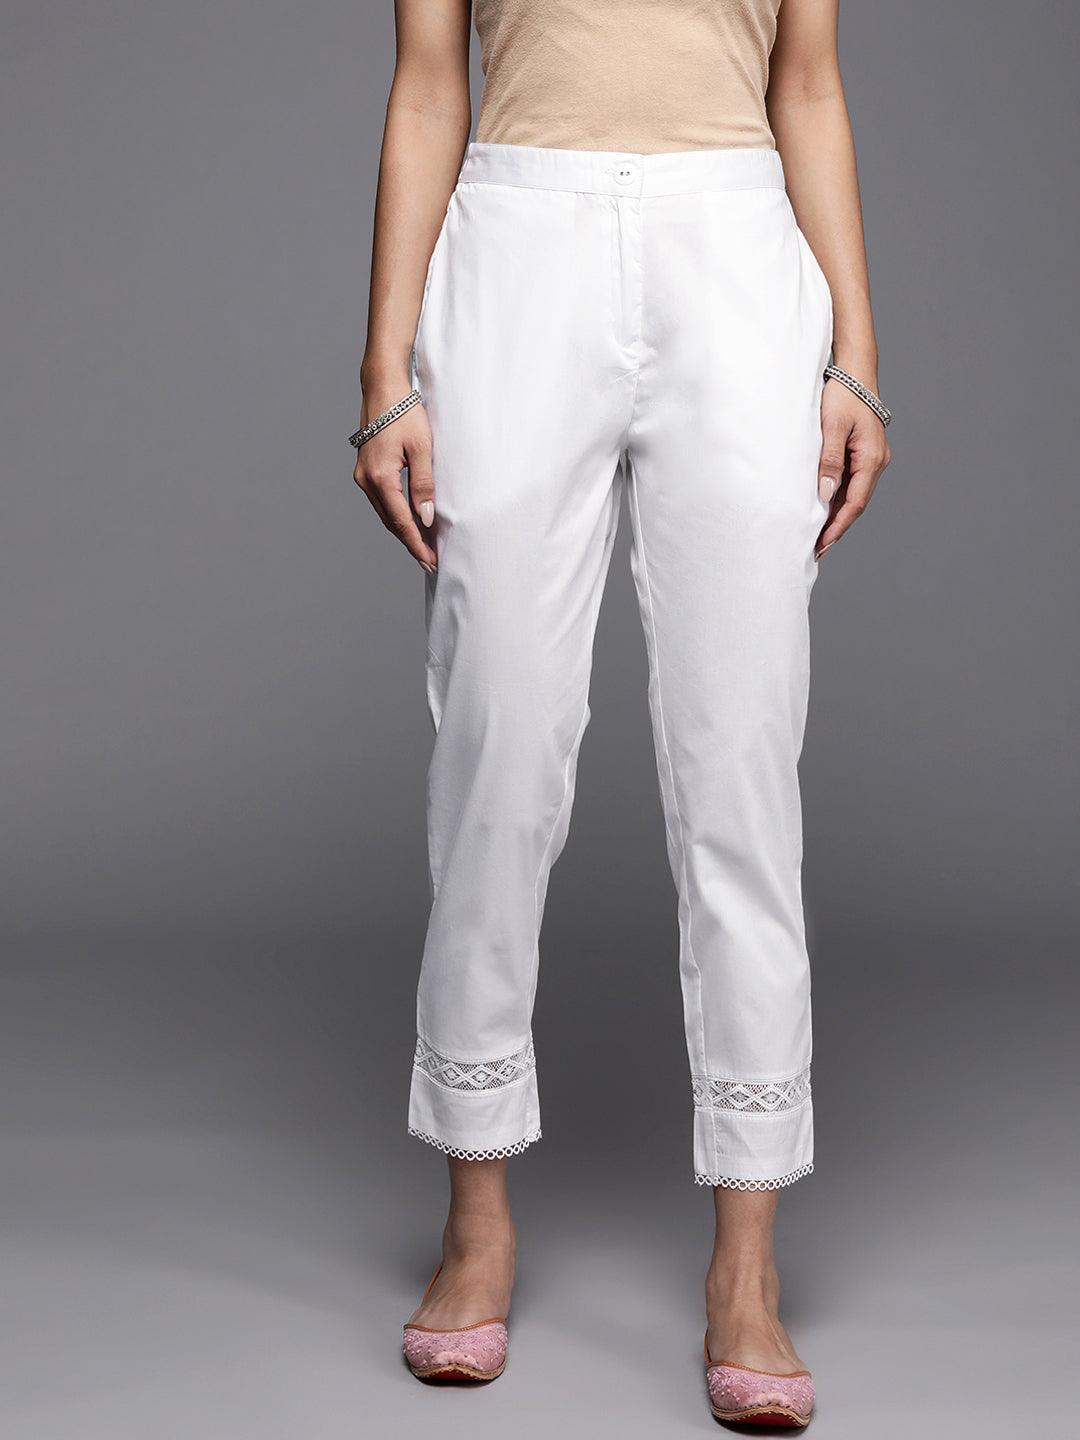 Off White Solid Cotton Trousers